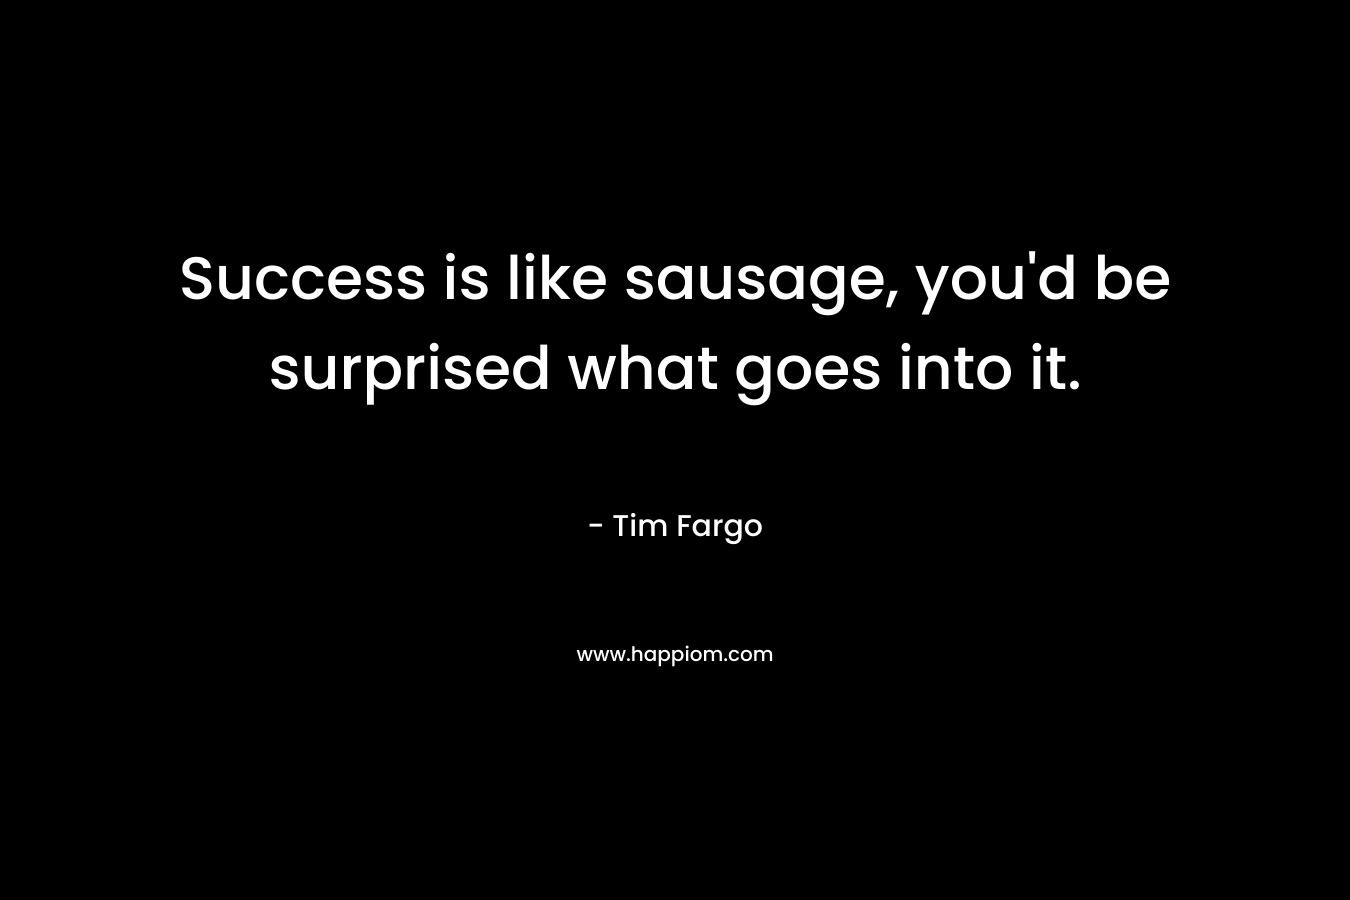 Success is like sausage, you’d be surprised what goes into it. – Tim Fargo